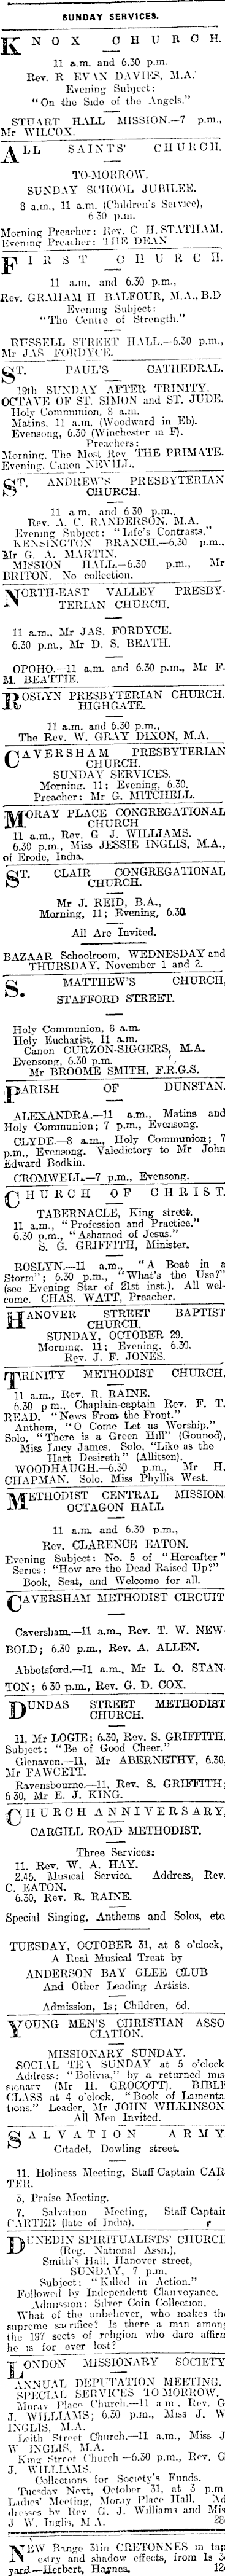 Papers Past Newspapers Otago Daily Times 28 October 1916 Page 11 Advertisements Column 1